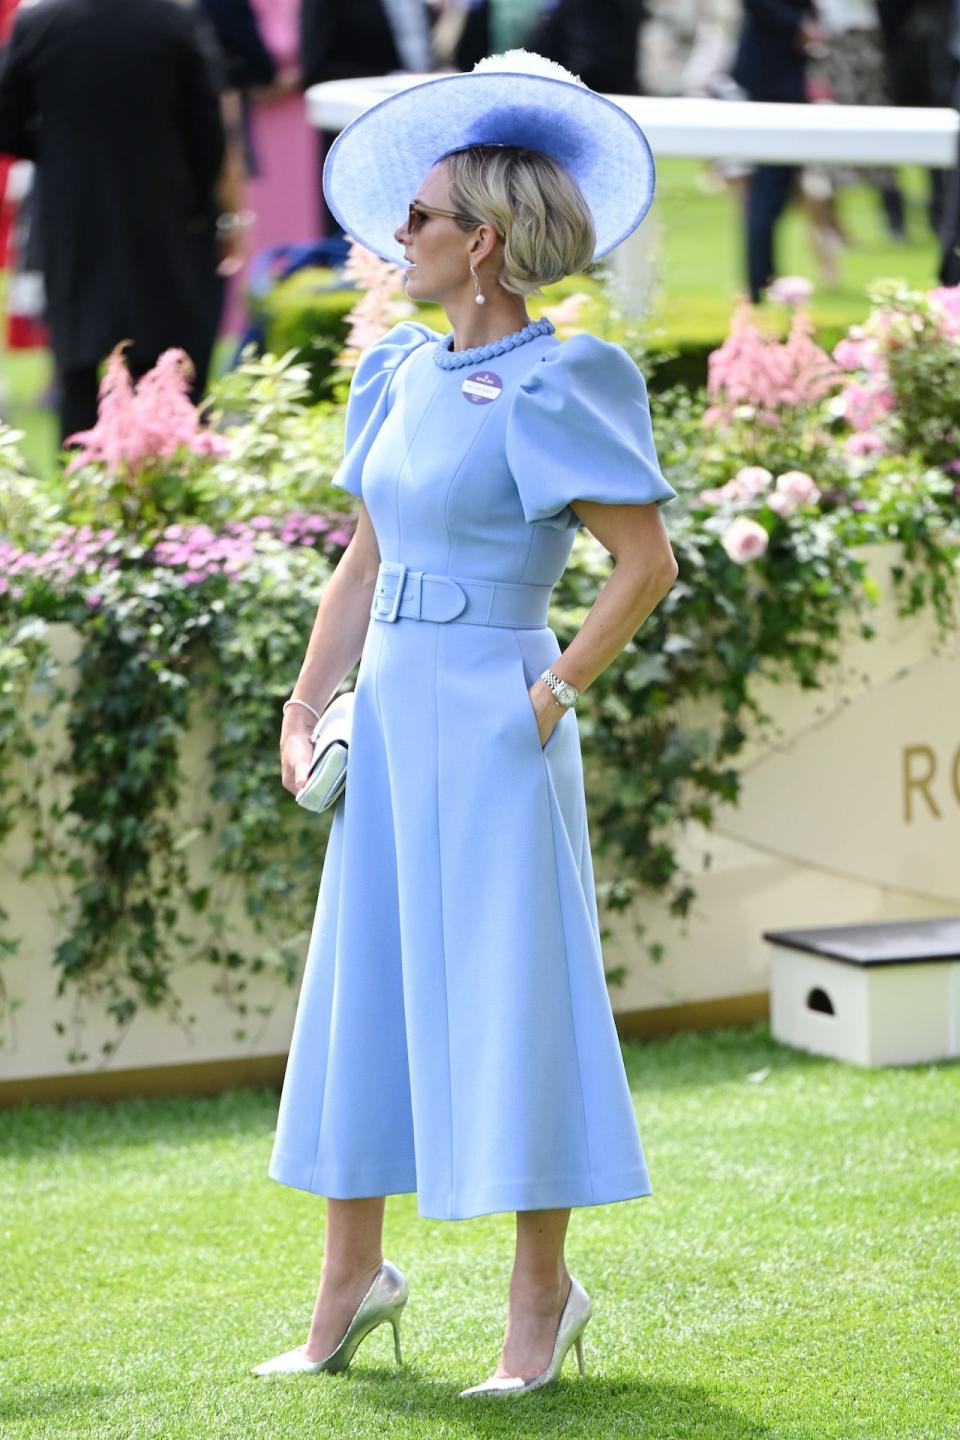 Zara Tindall wearing a powder blue dress with a coordinating hat.